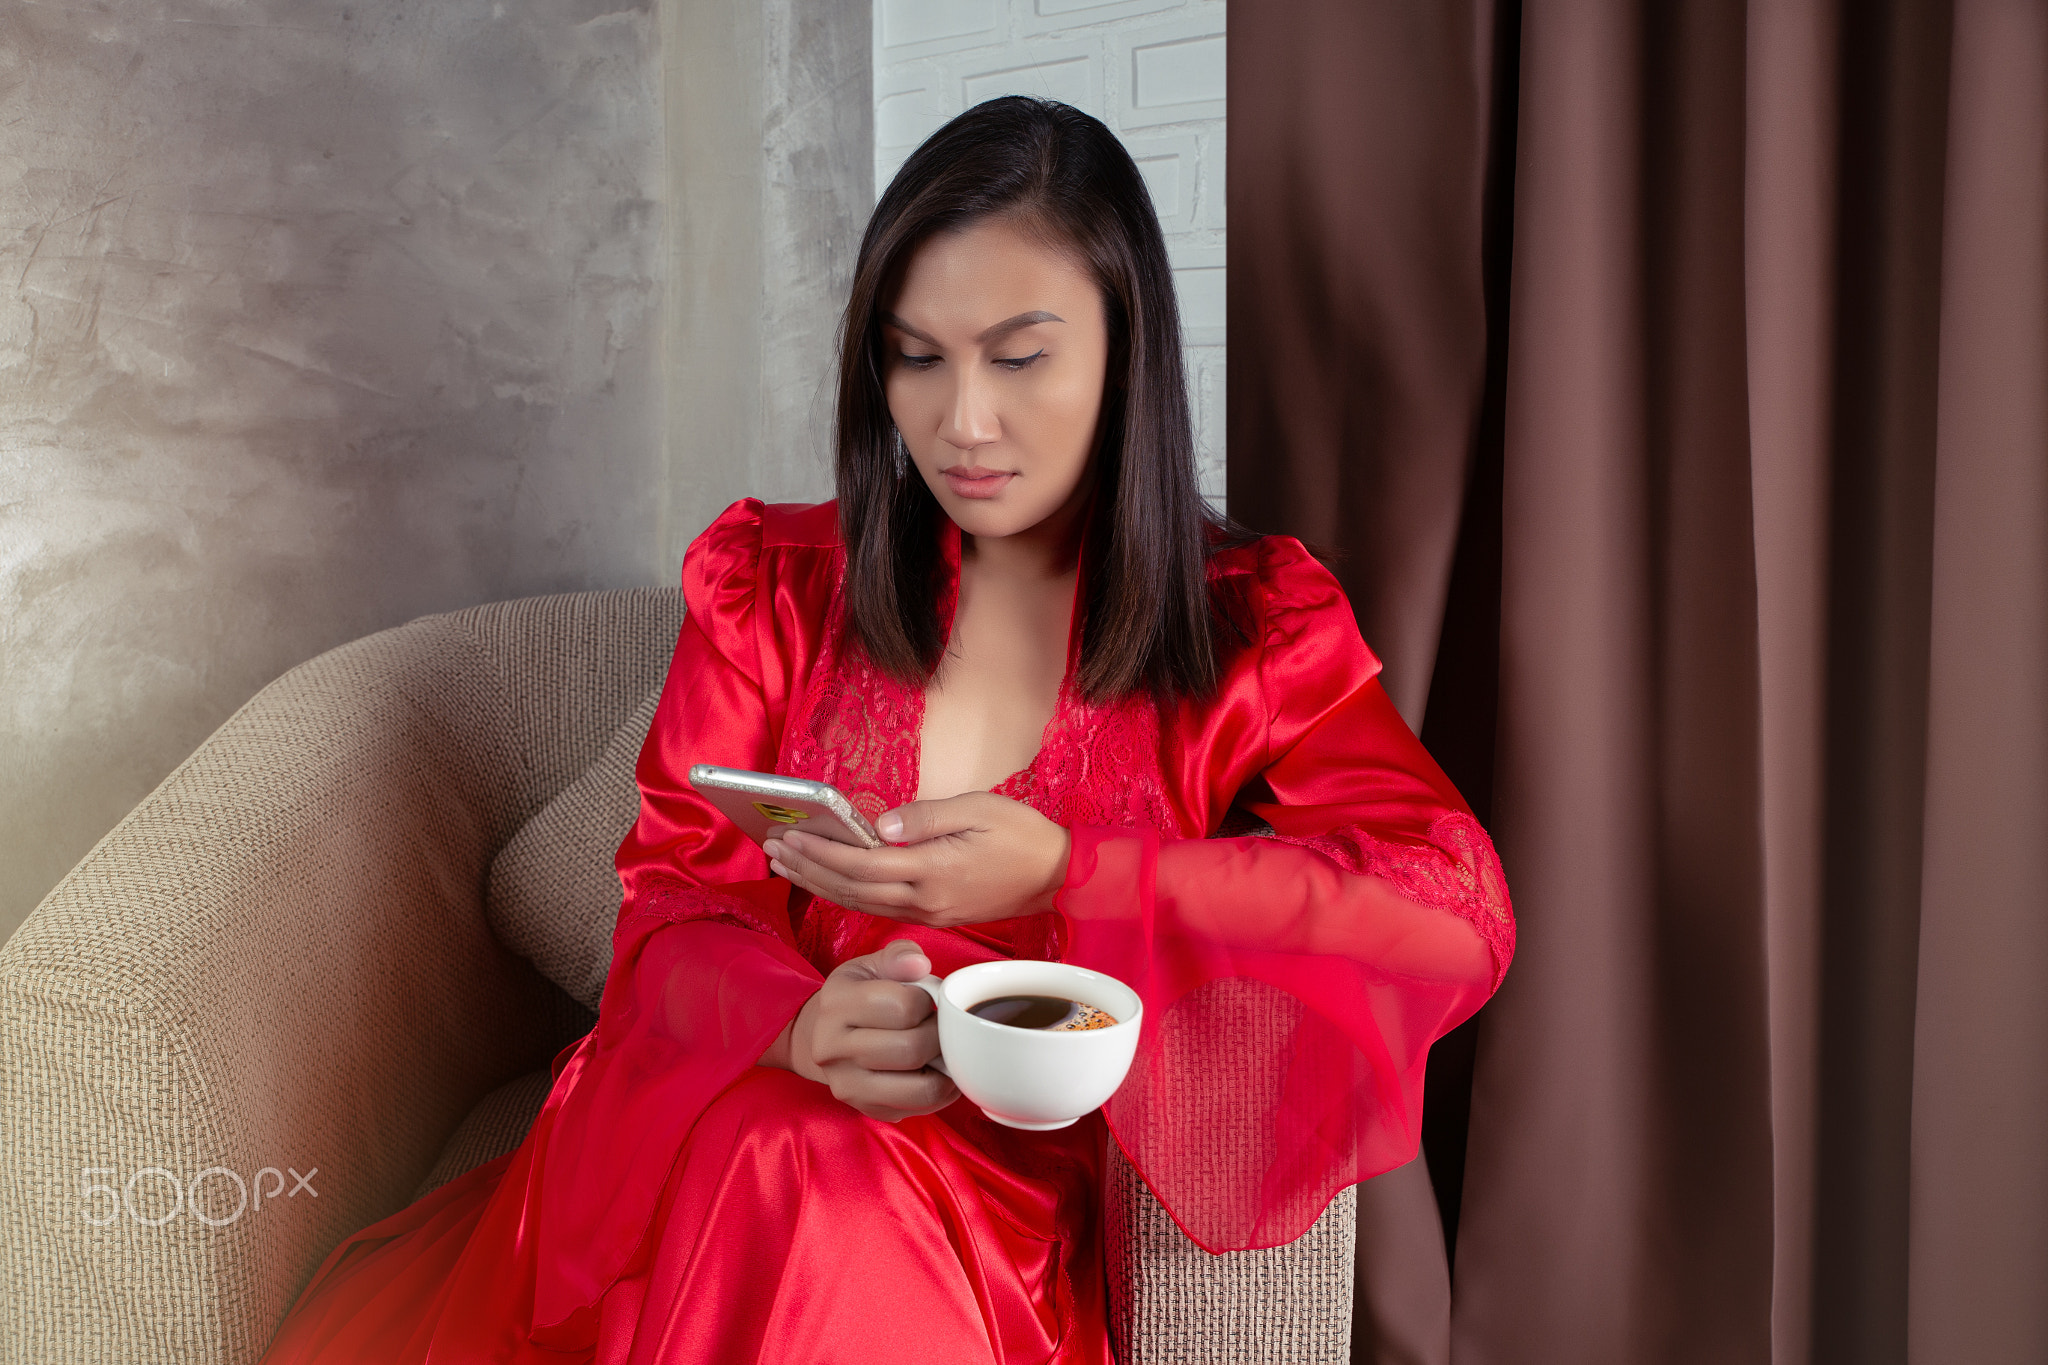 Woman in red satin nightgown looking at a smartphone.